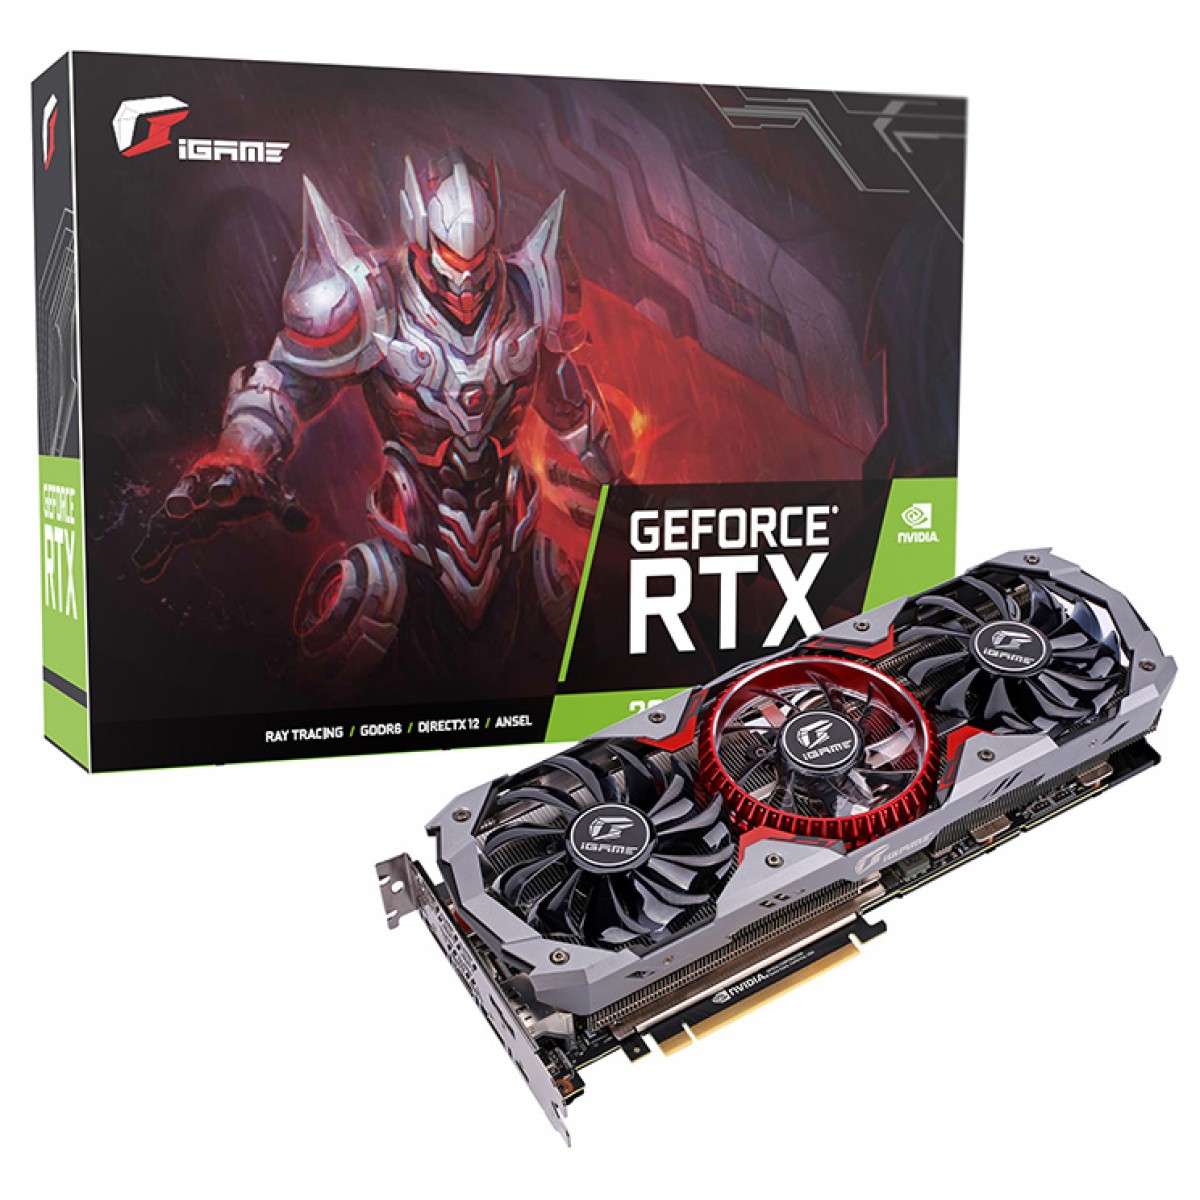 PC/タブレット PCパーツ Placa de Vídeo Colorful iGame Geforce RTX 2080 Ti Advanced OC 